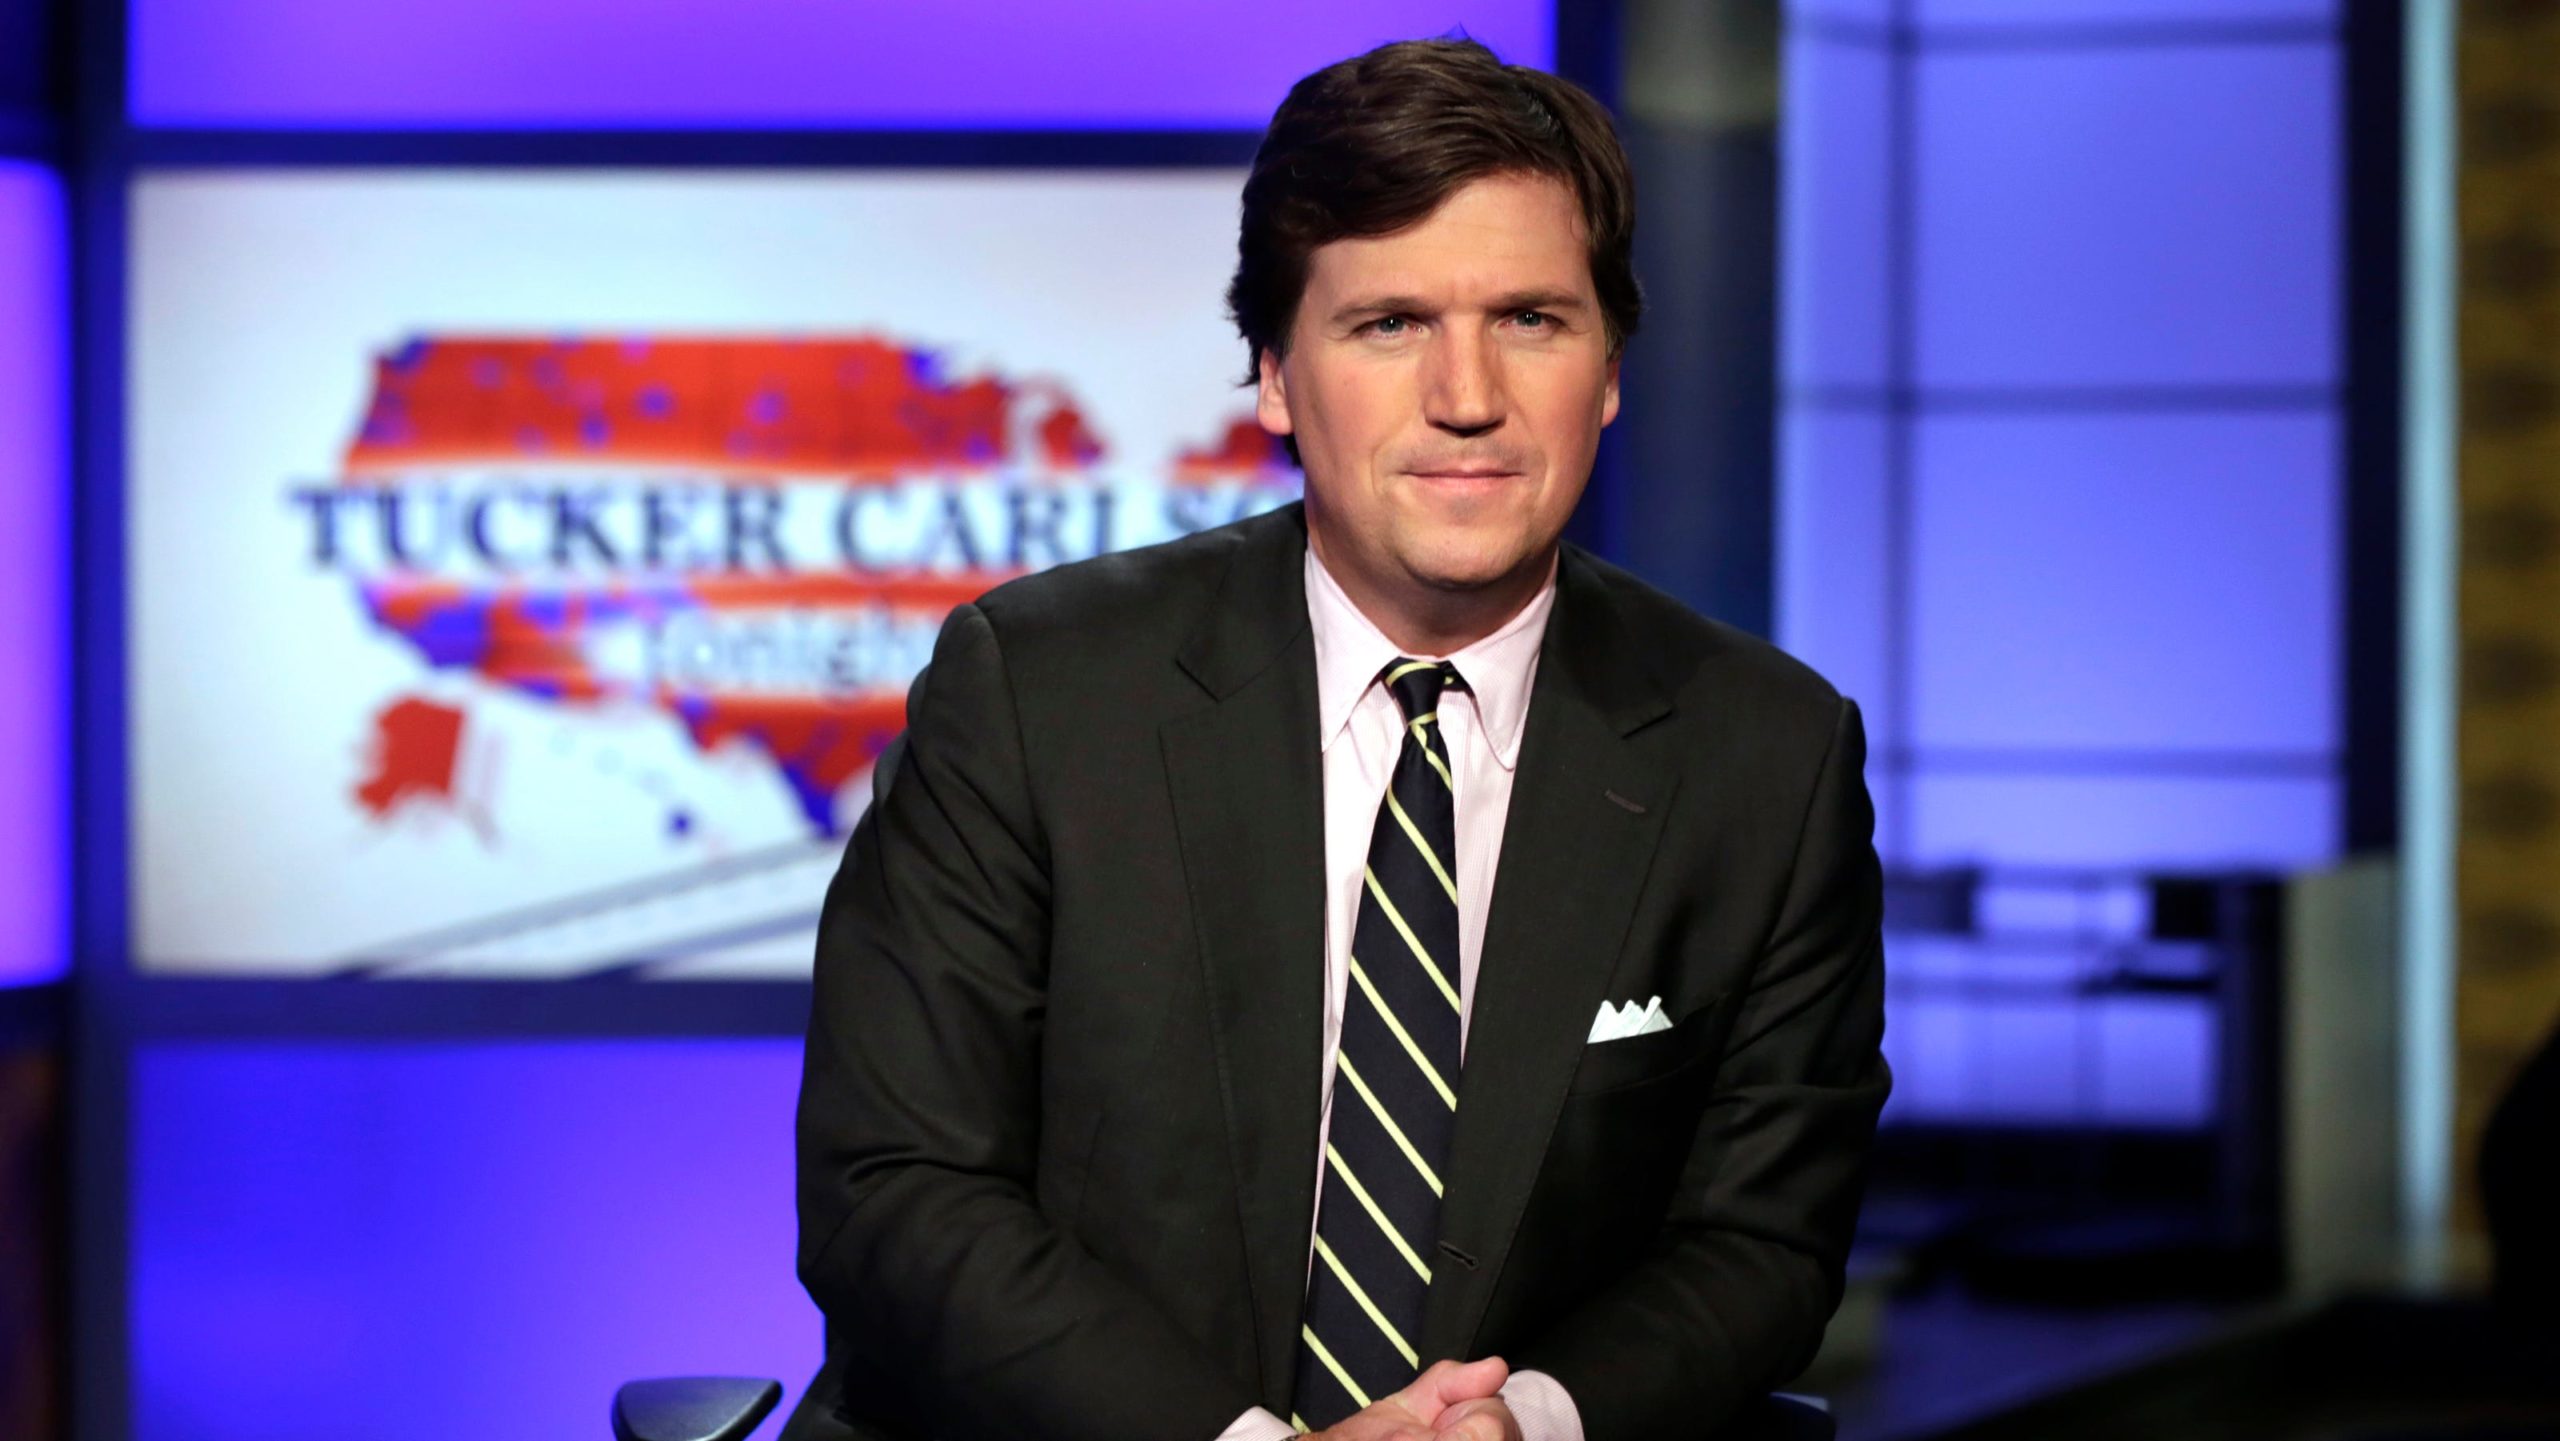 Tucker Carlson’s “midget with a microphone” comment on a CNN reporter, garners yet another Controversy!